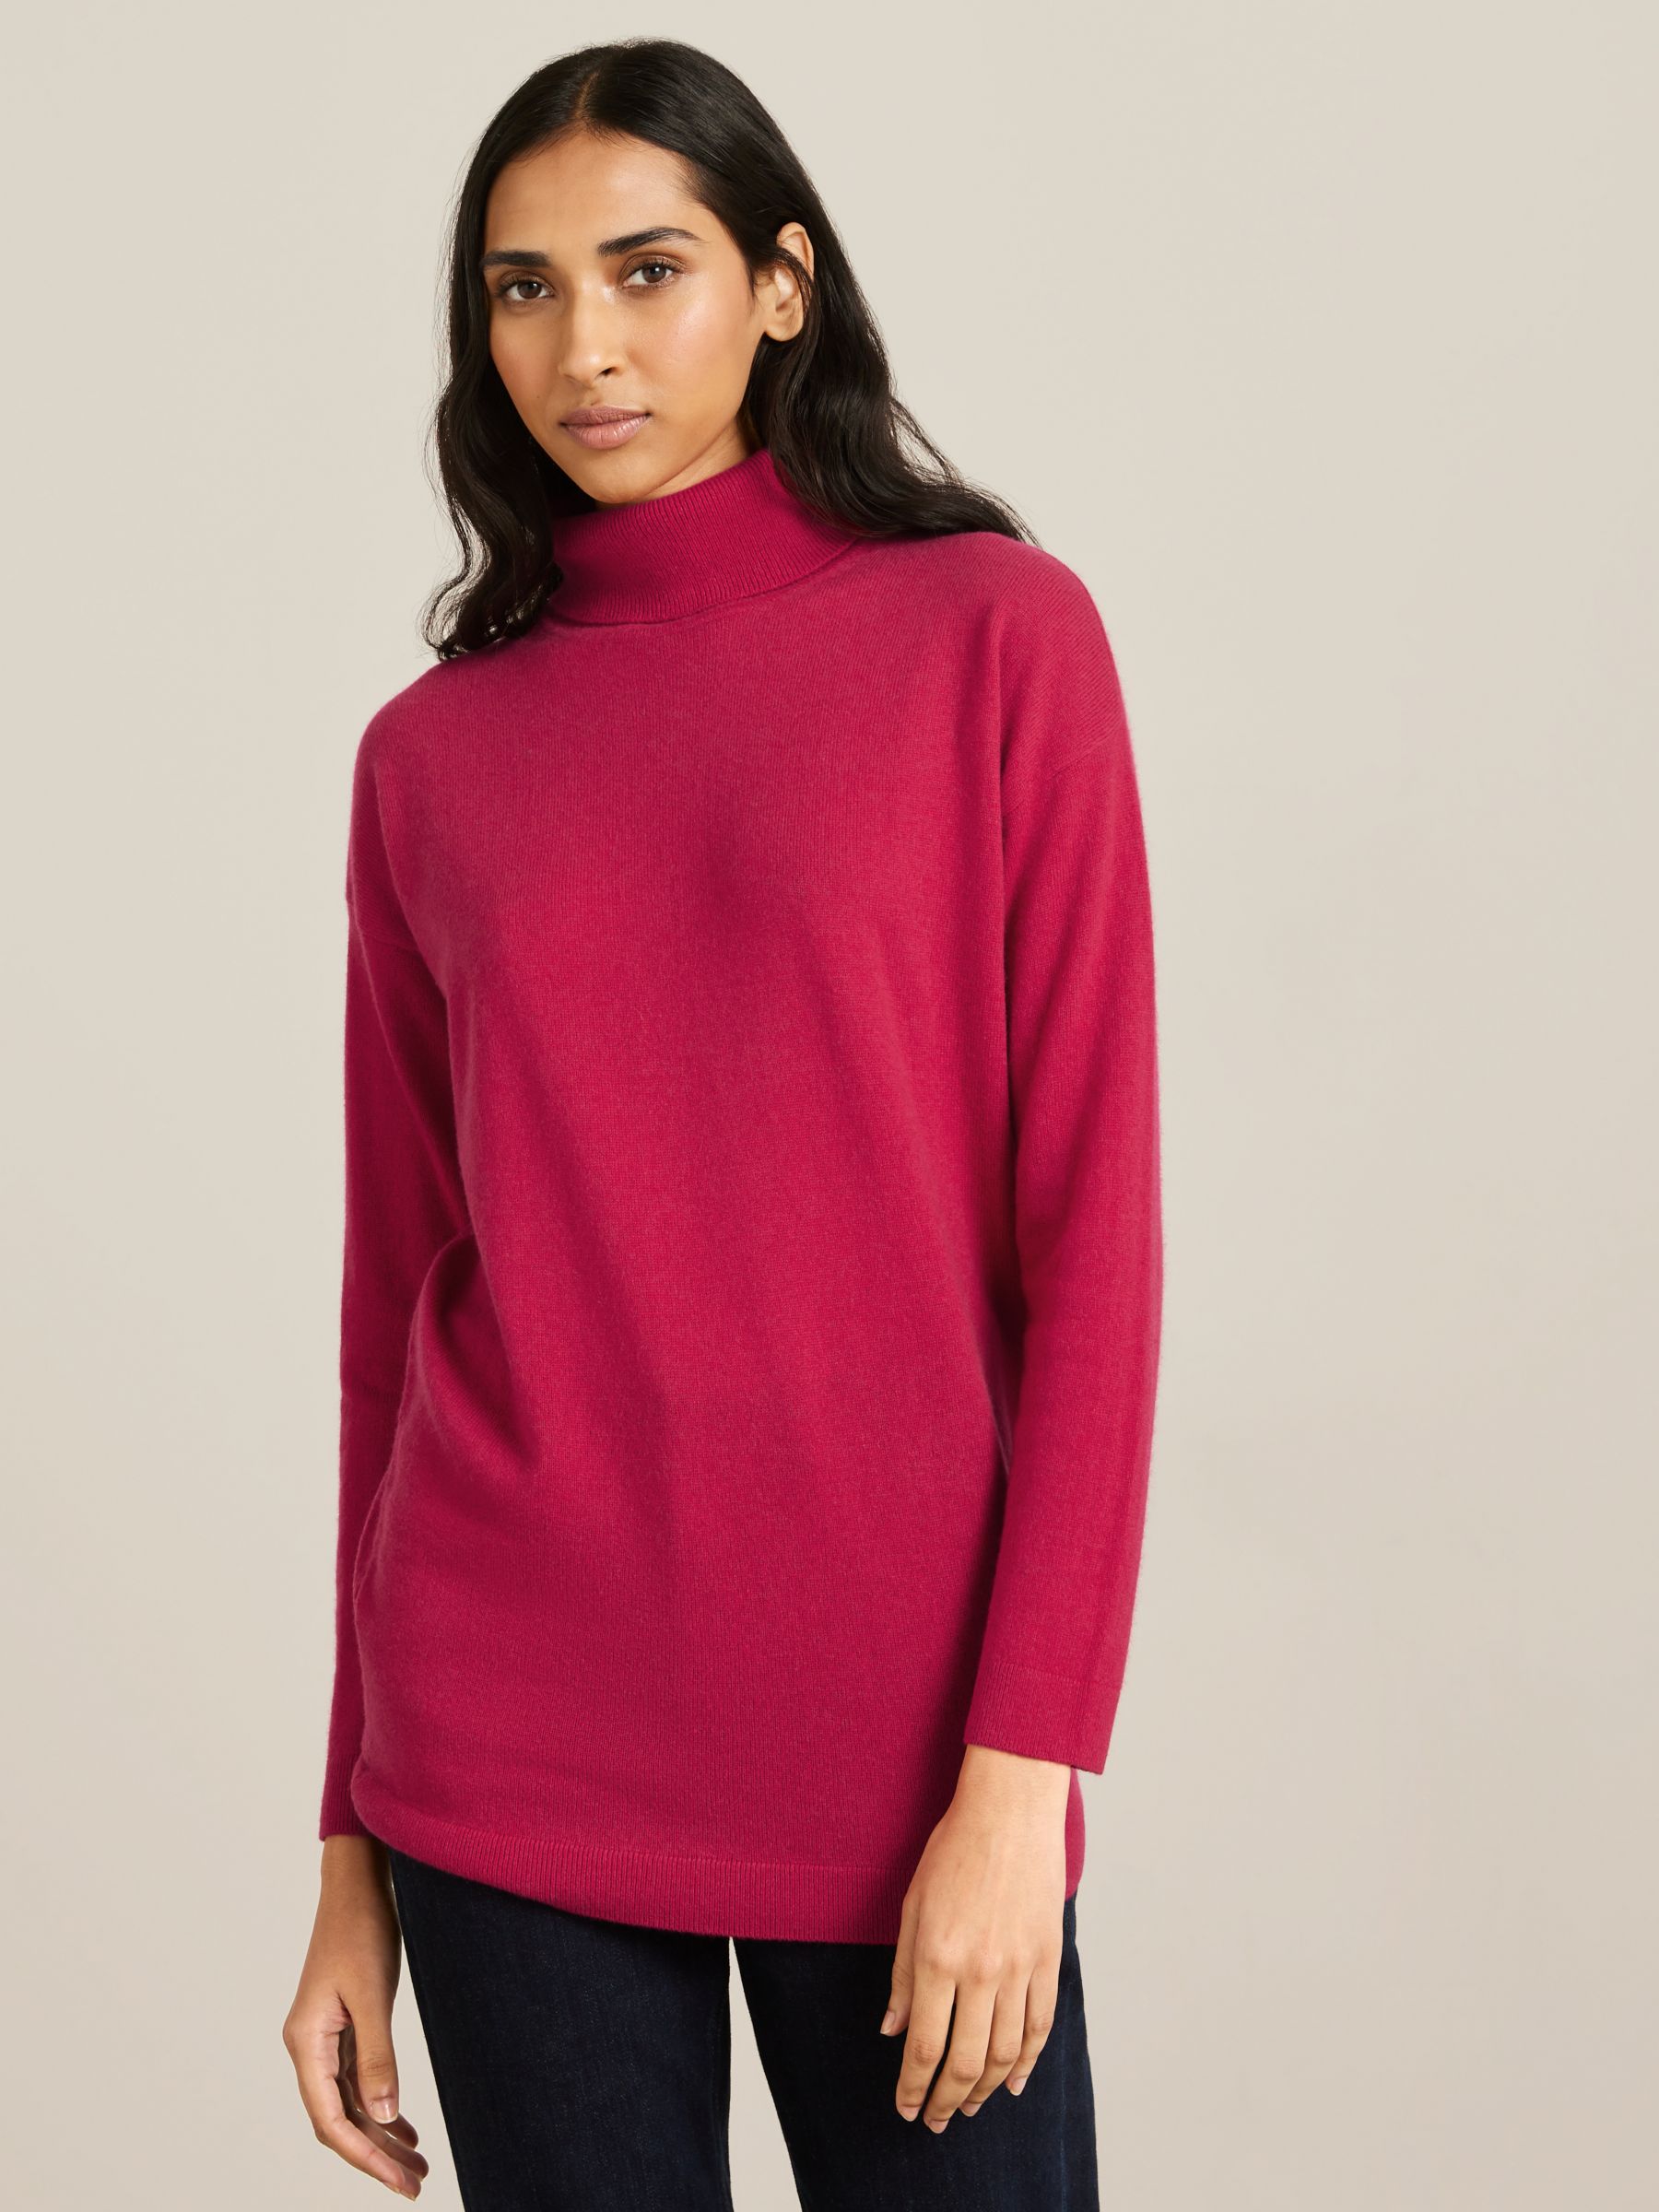 John Lewis Cashmere Relaxed Roll Neck Sweater